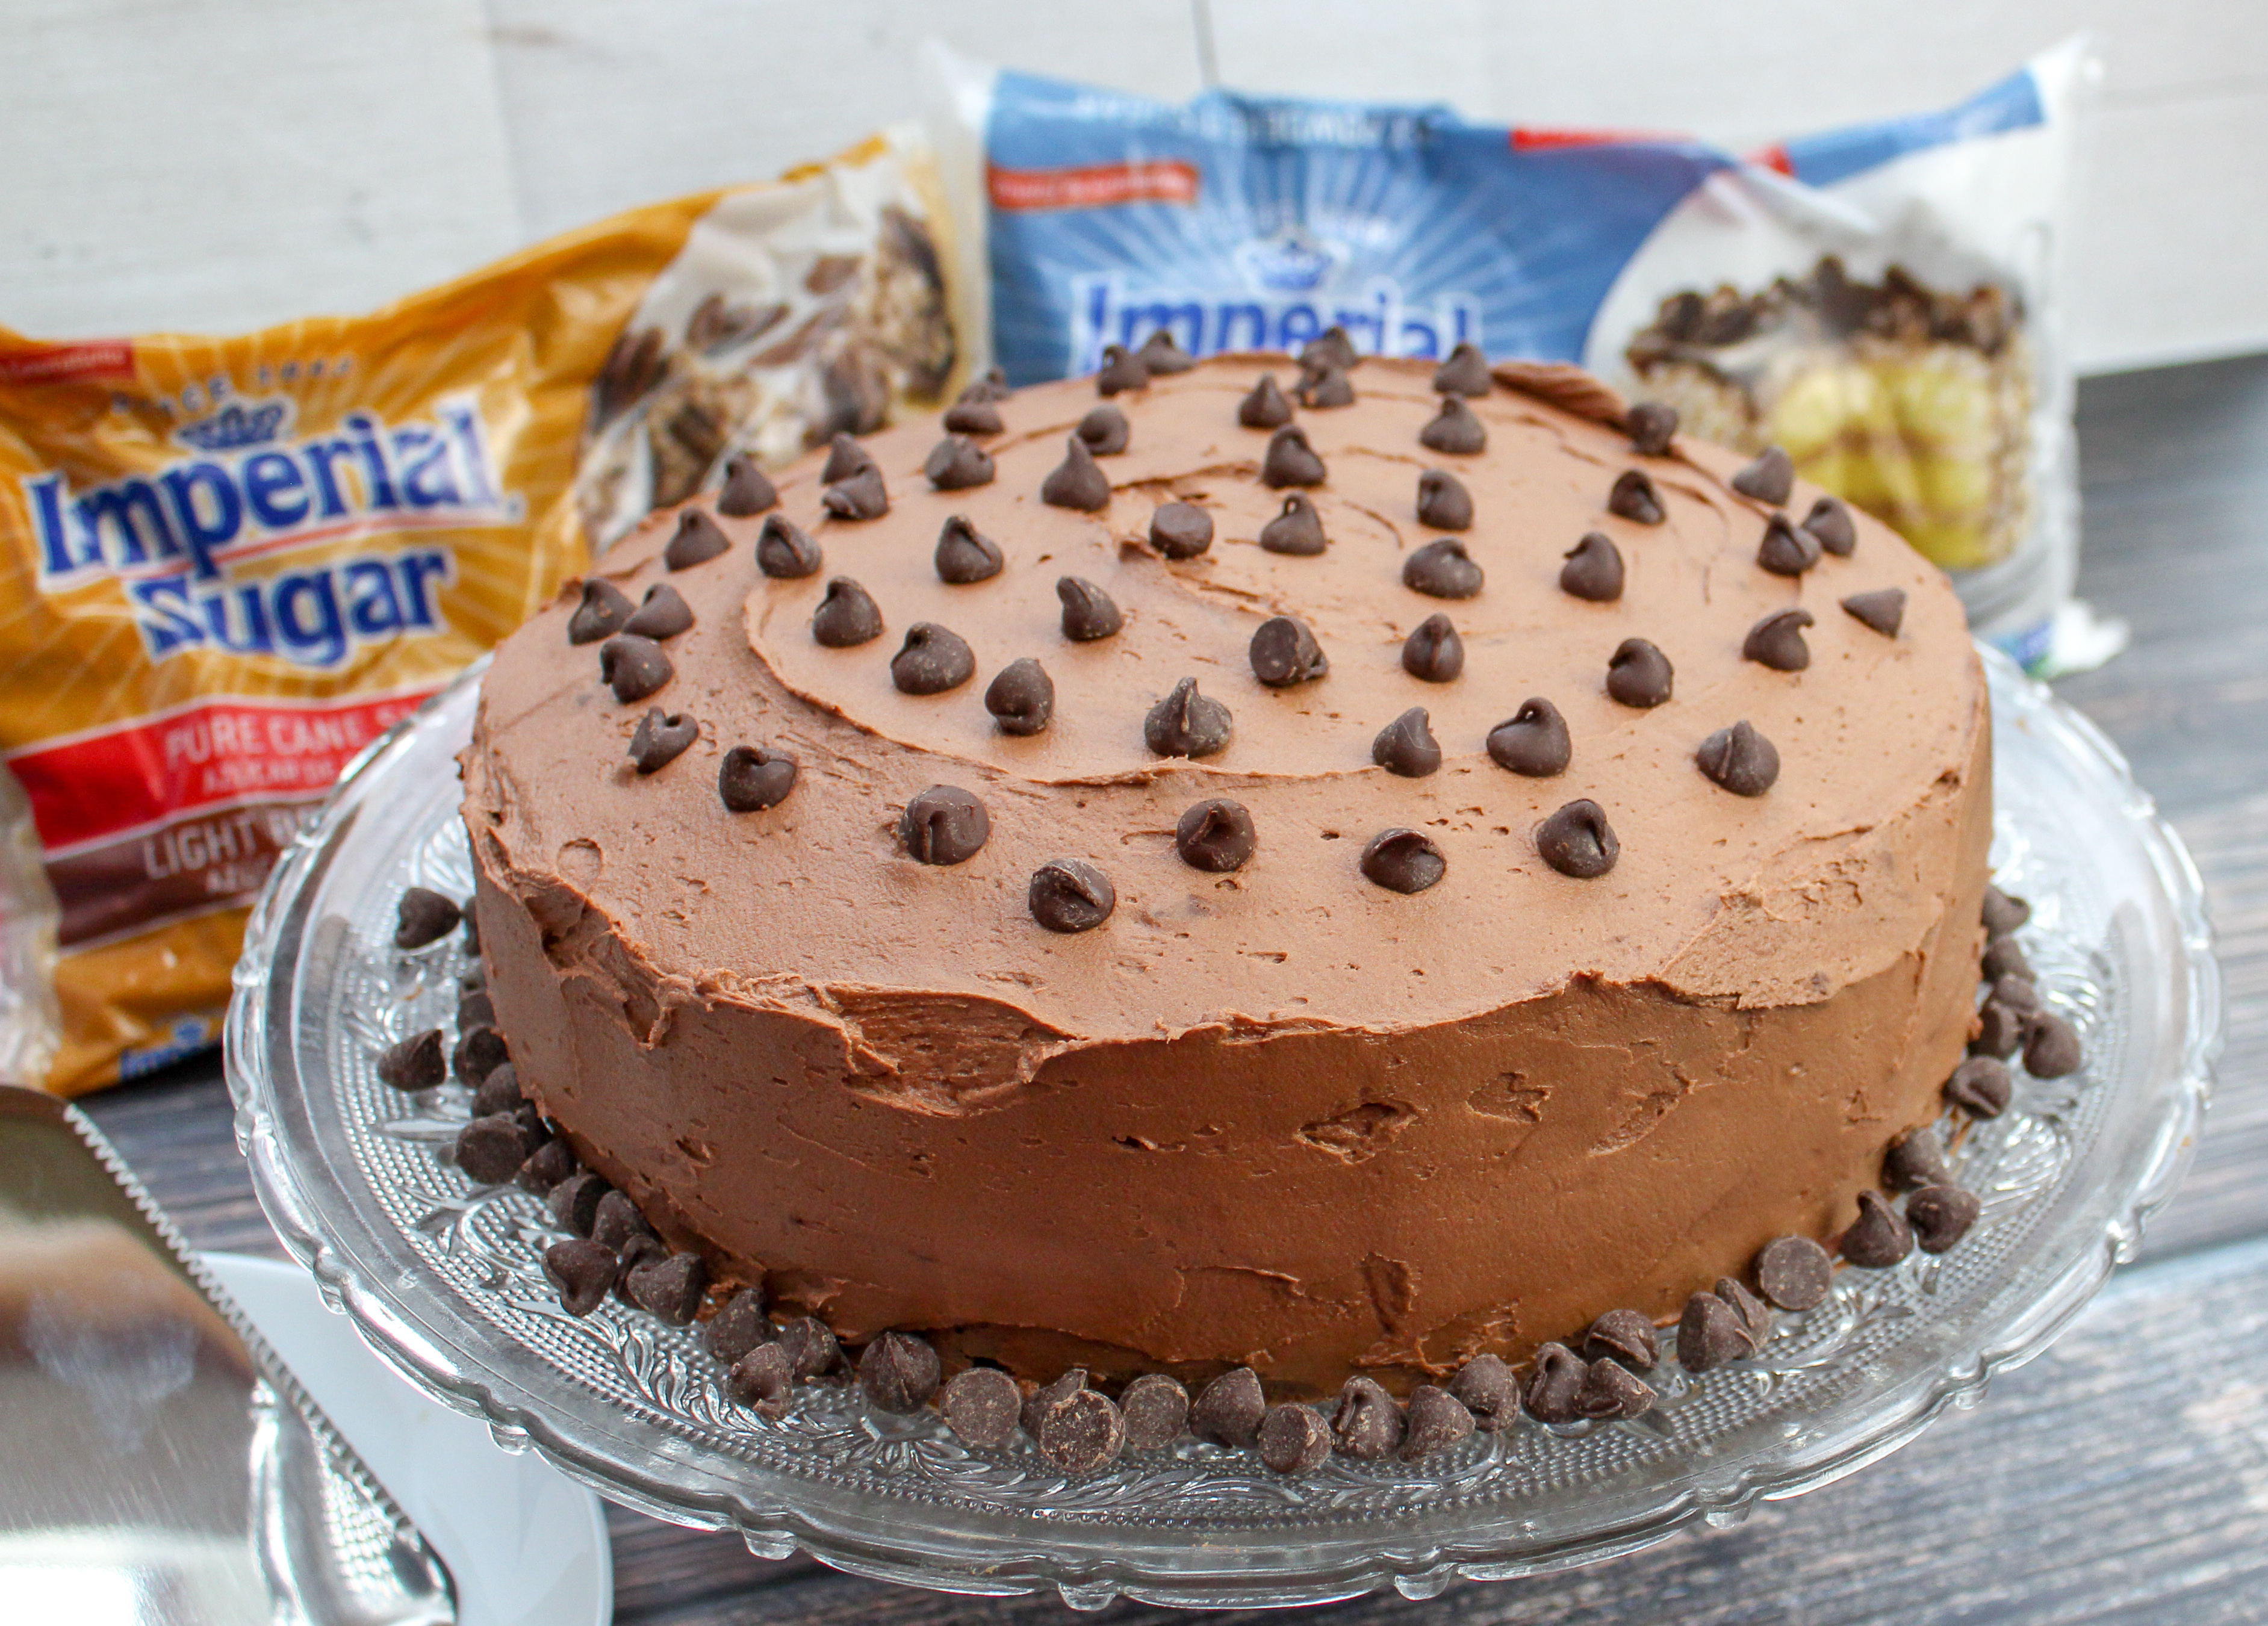 Full round cake with chocolate buttercream and topped with chocolate chips